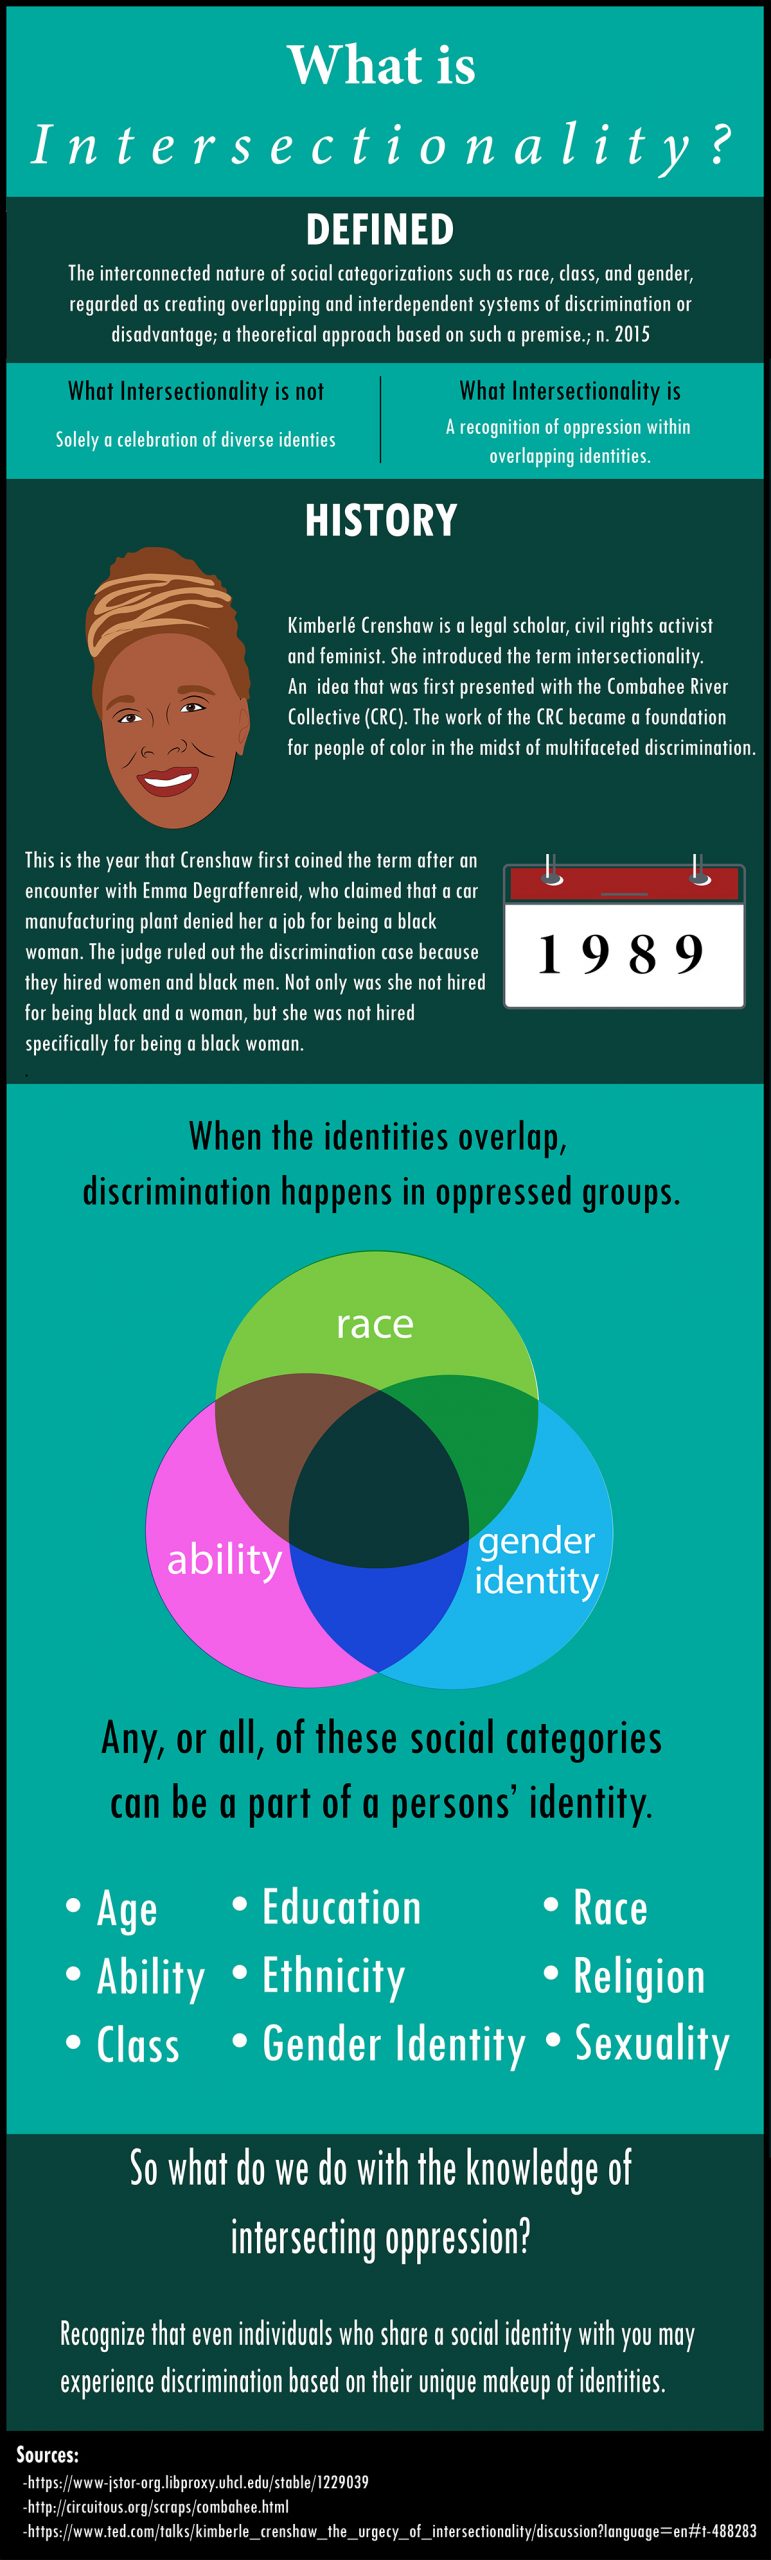 GRAPHIC: Infographic on the definition and history of intersectionality. Graphic by The Signal reporter Amanda Weidle.